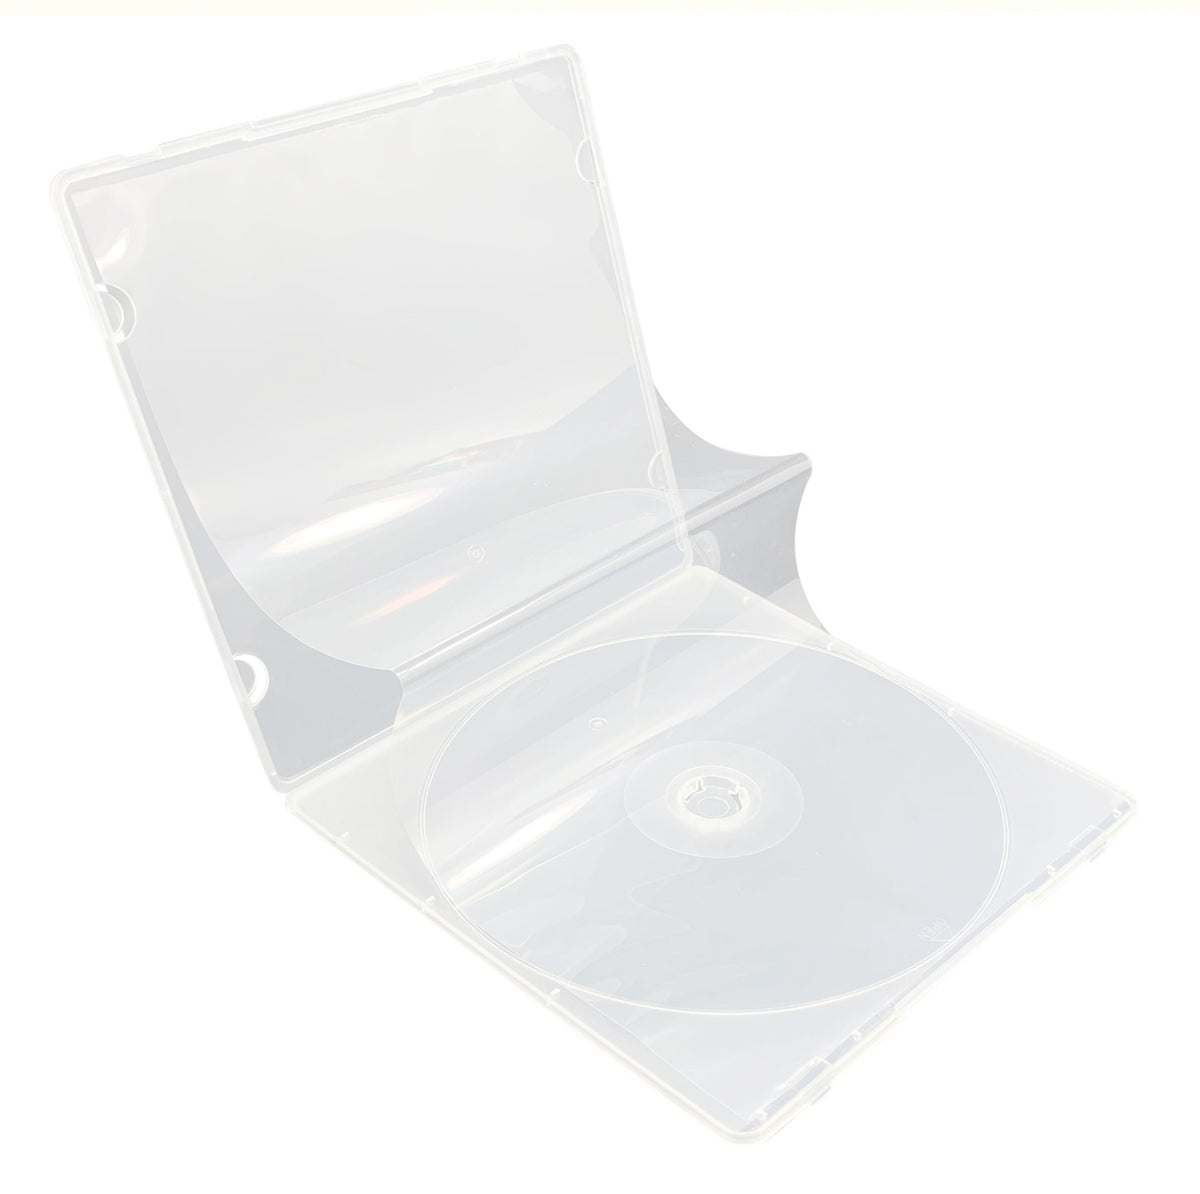 CheckOutStore 25 PREMIUM STANDARD Solid White Color Double DVD Cases (100%  New Material) 